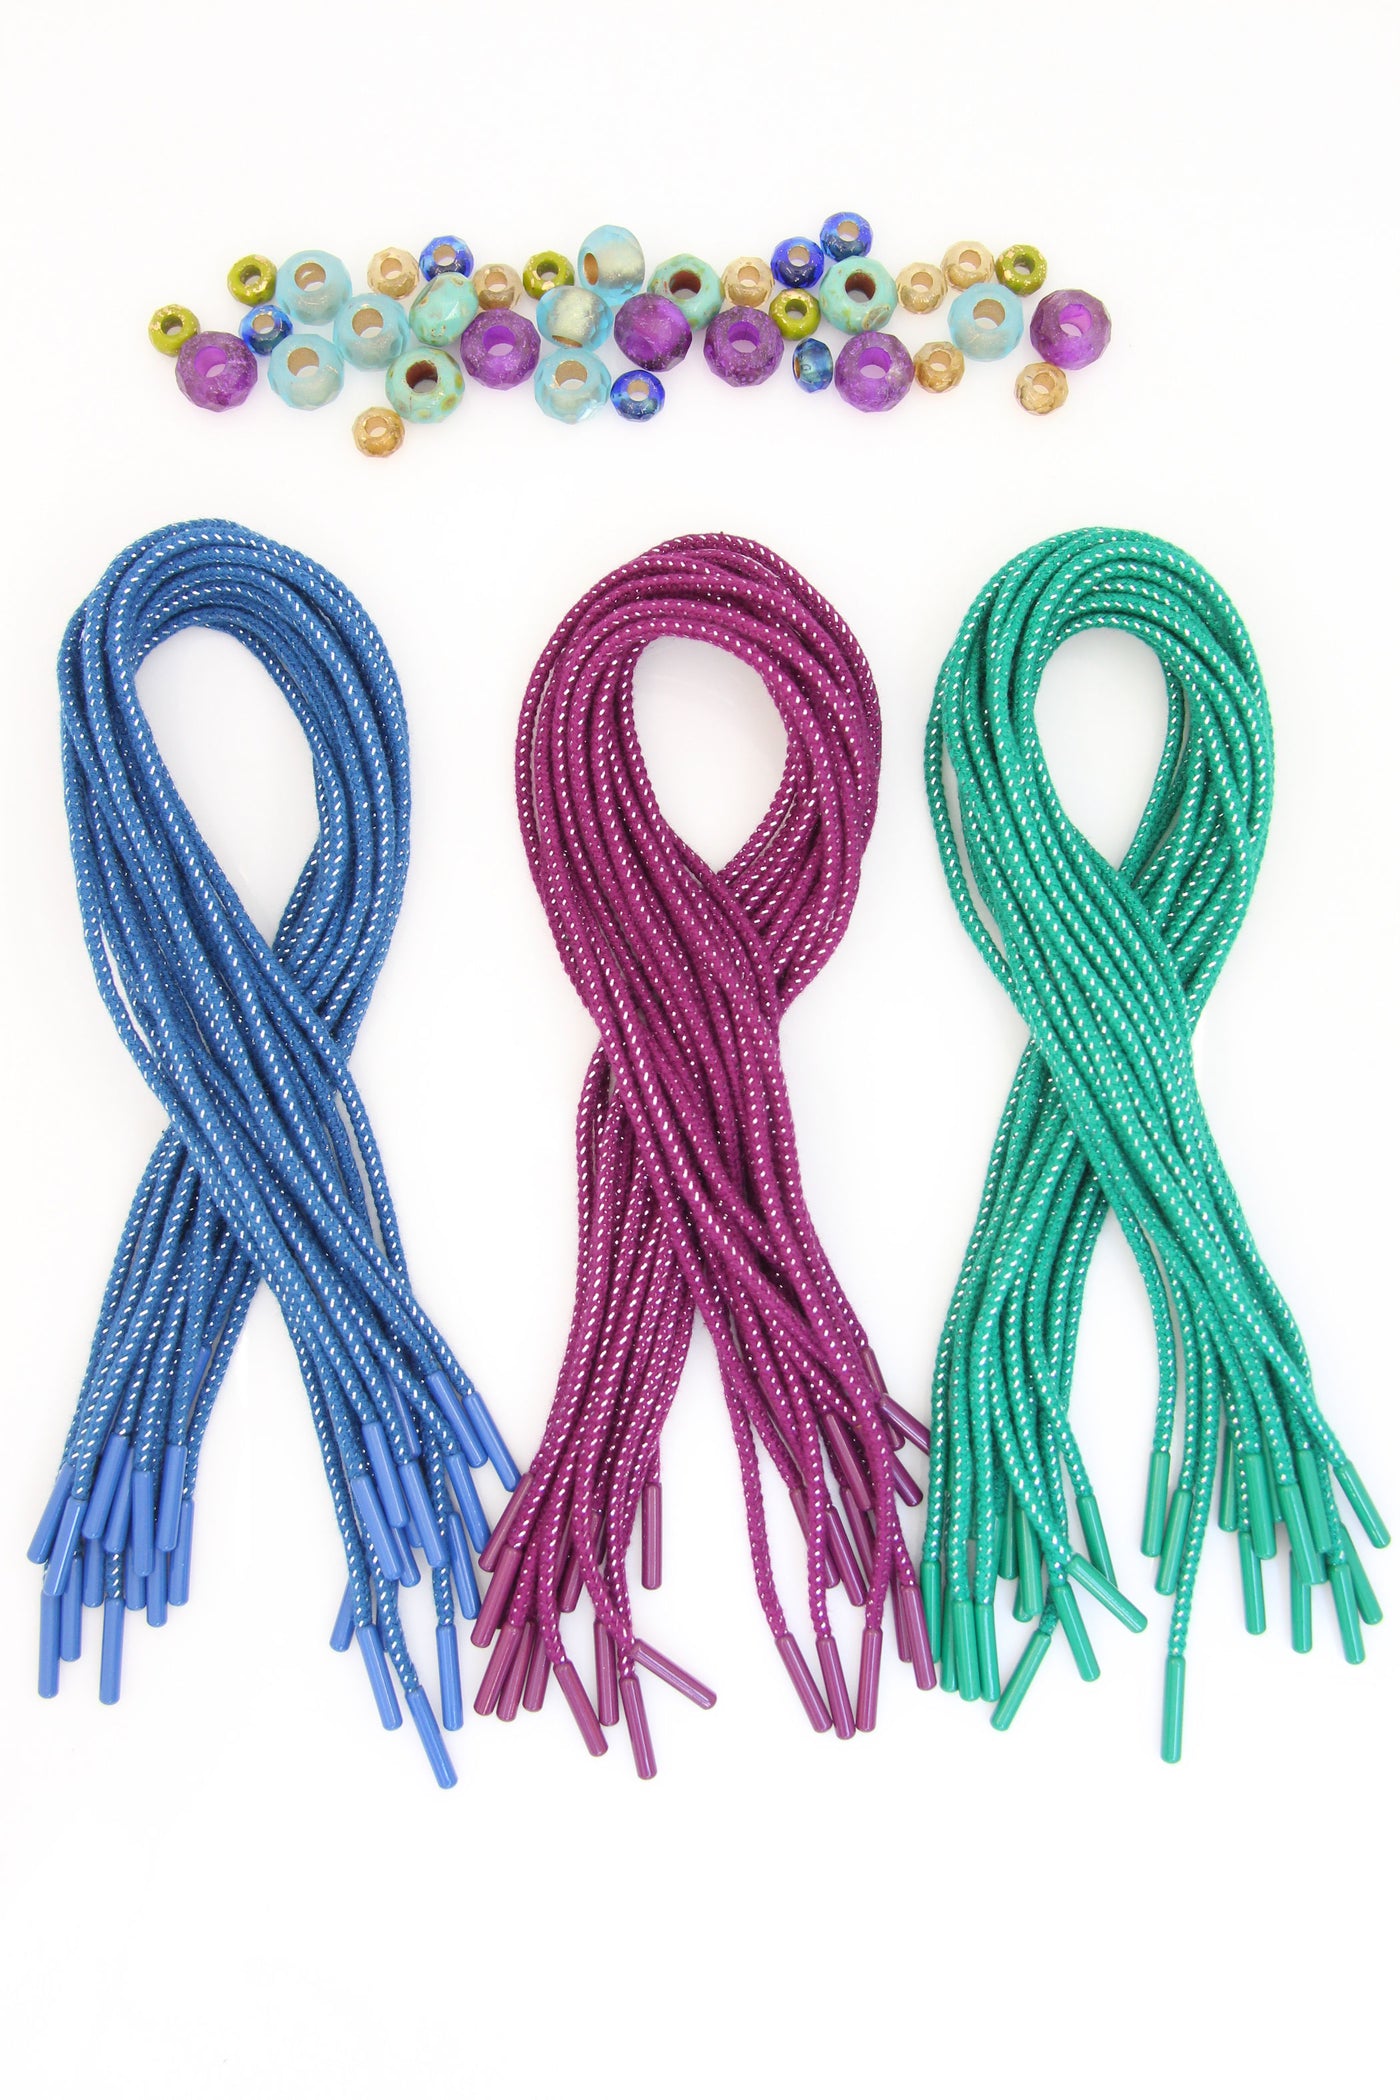 Braided Cotton Cords with Finished Ends, for Tie-On Bracelets & Necklaces, Reusable